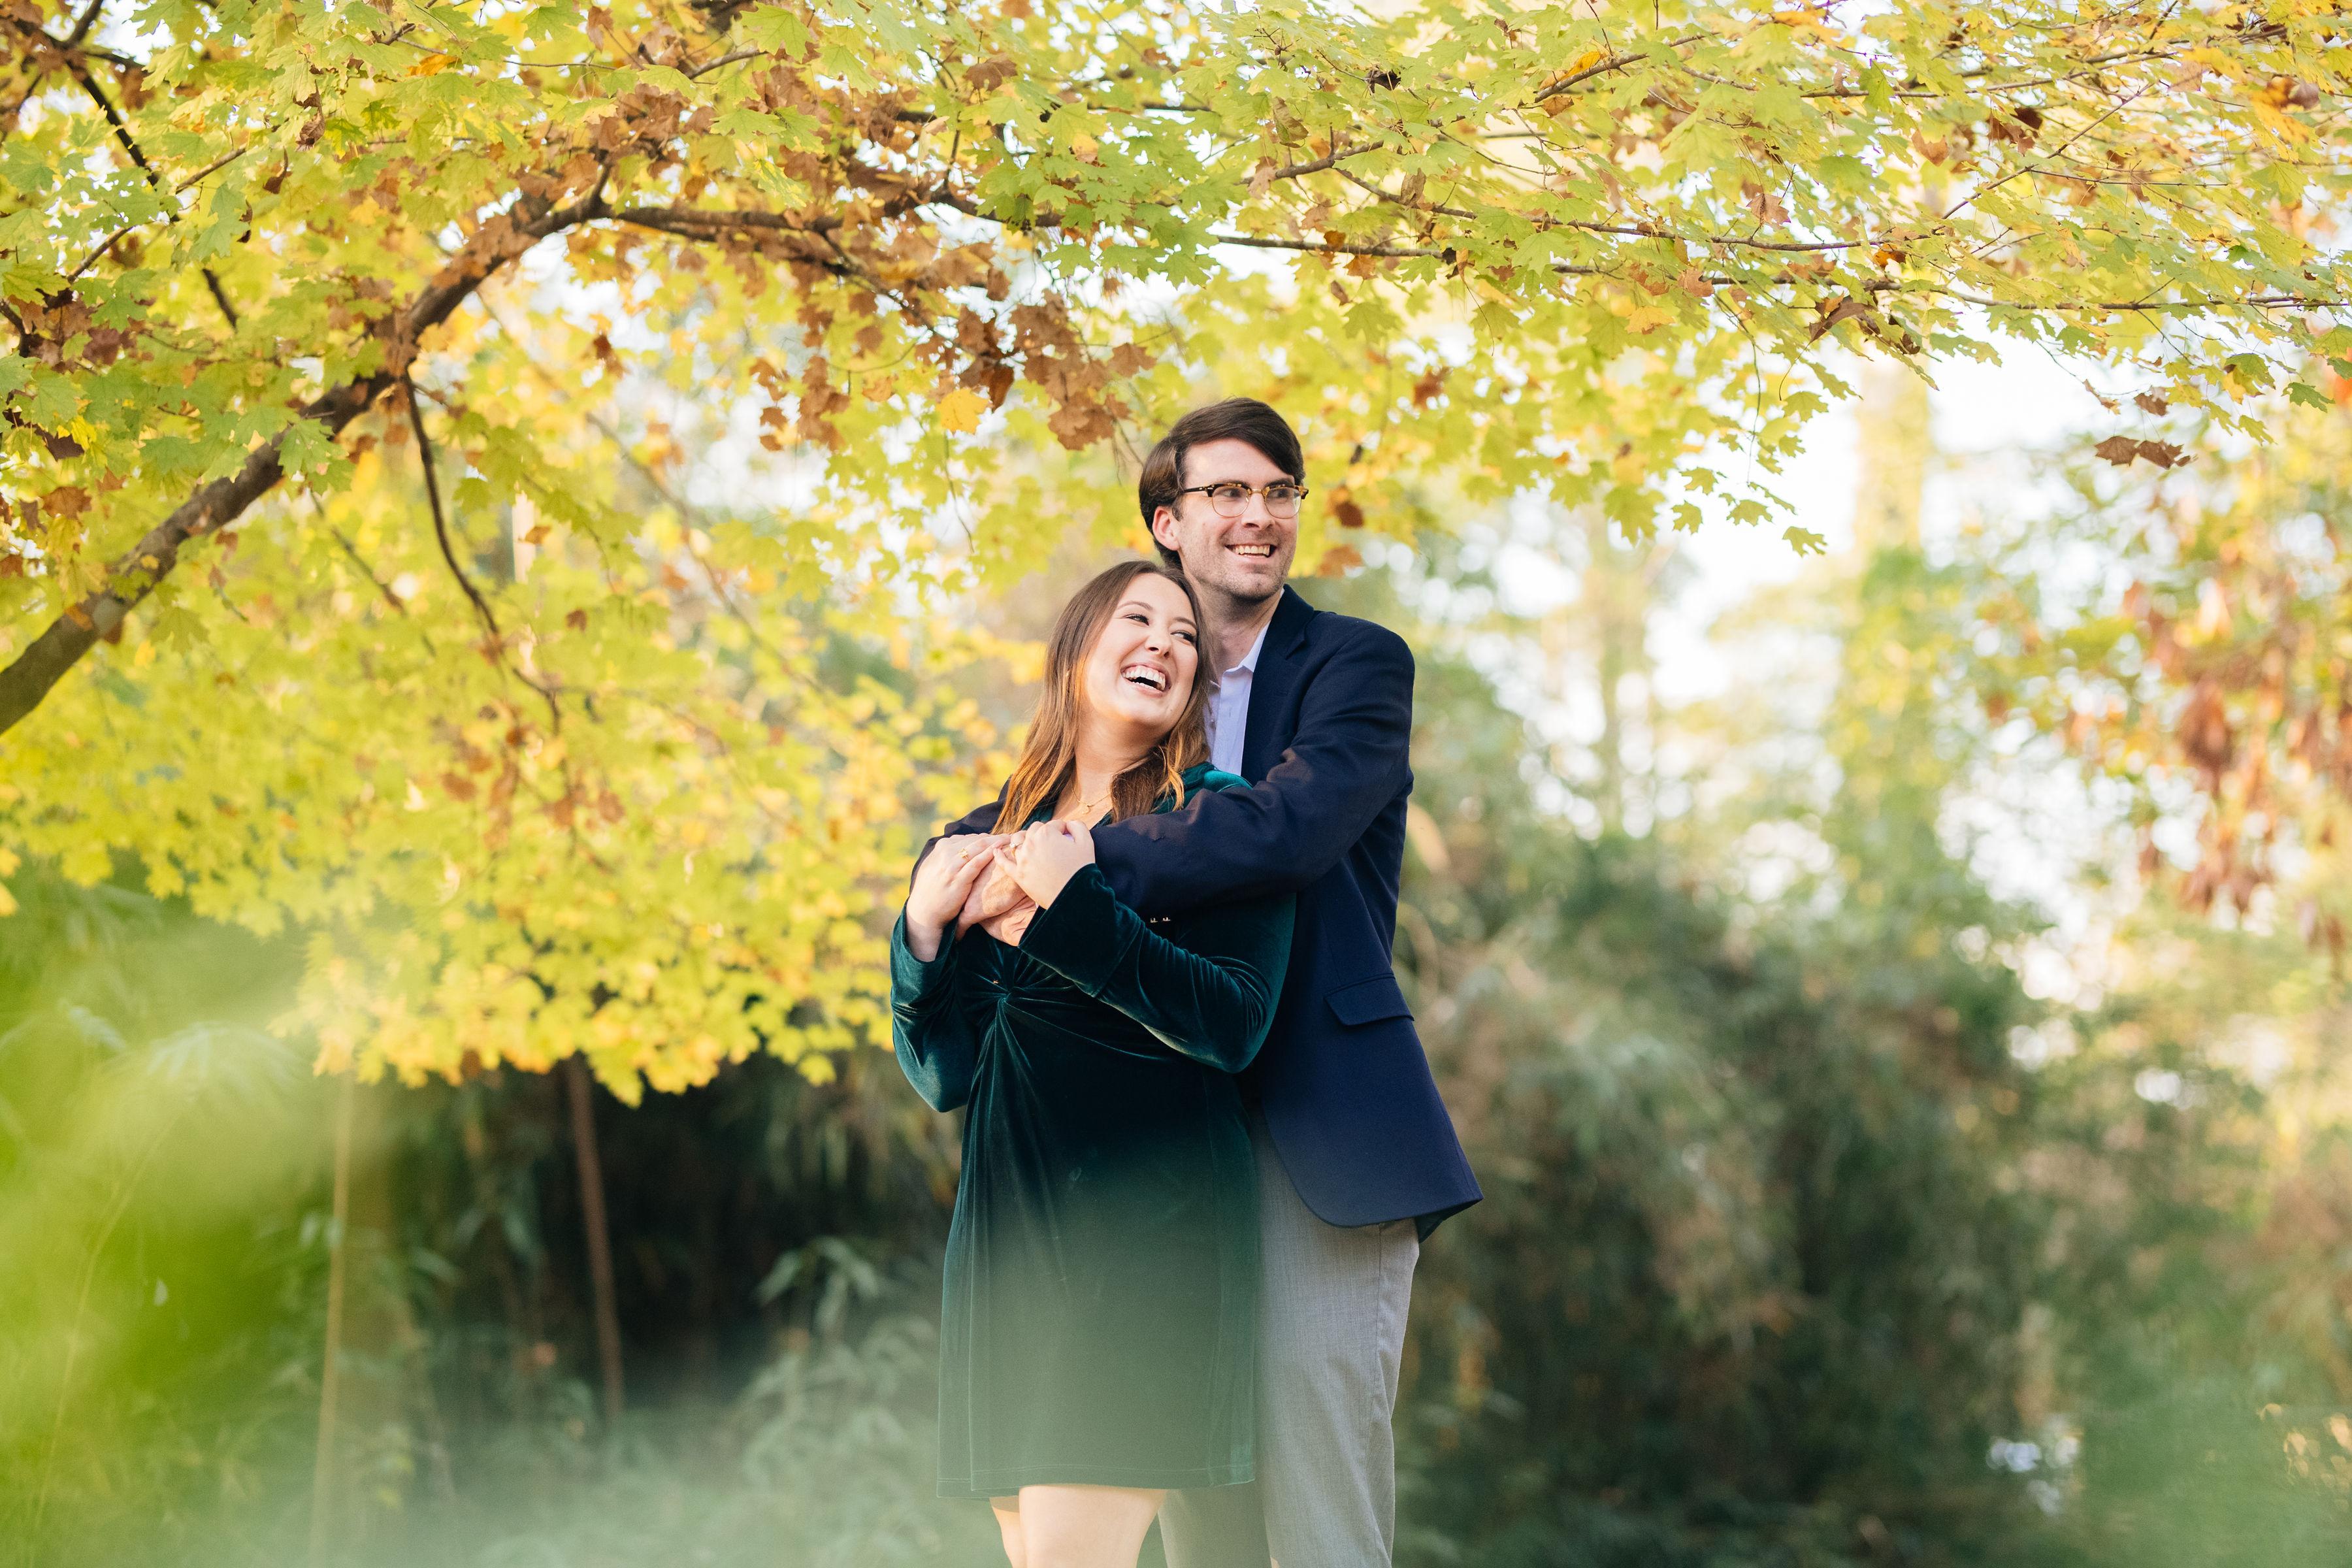 The Wedding Website of Suzanne Cooper and Andy Koerner